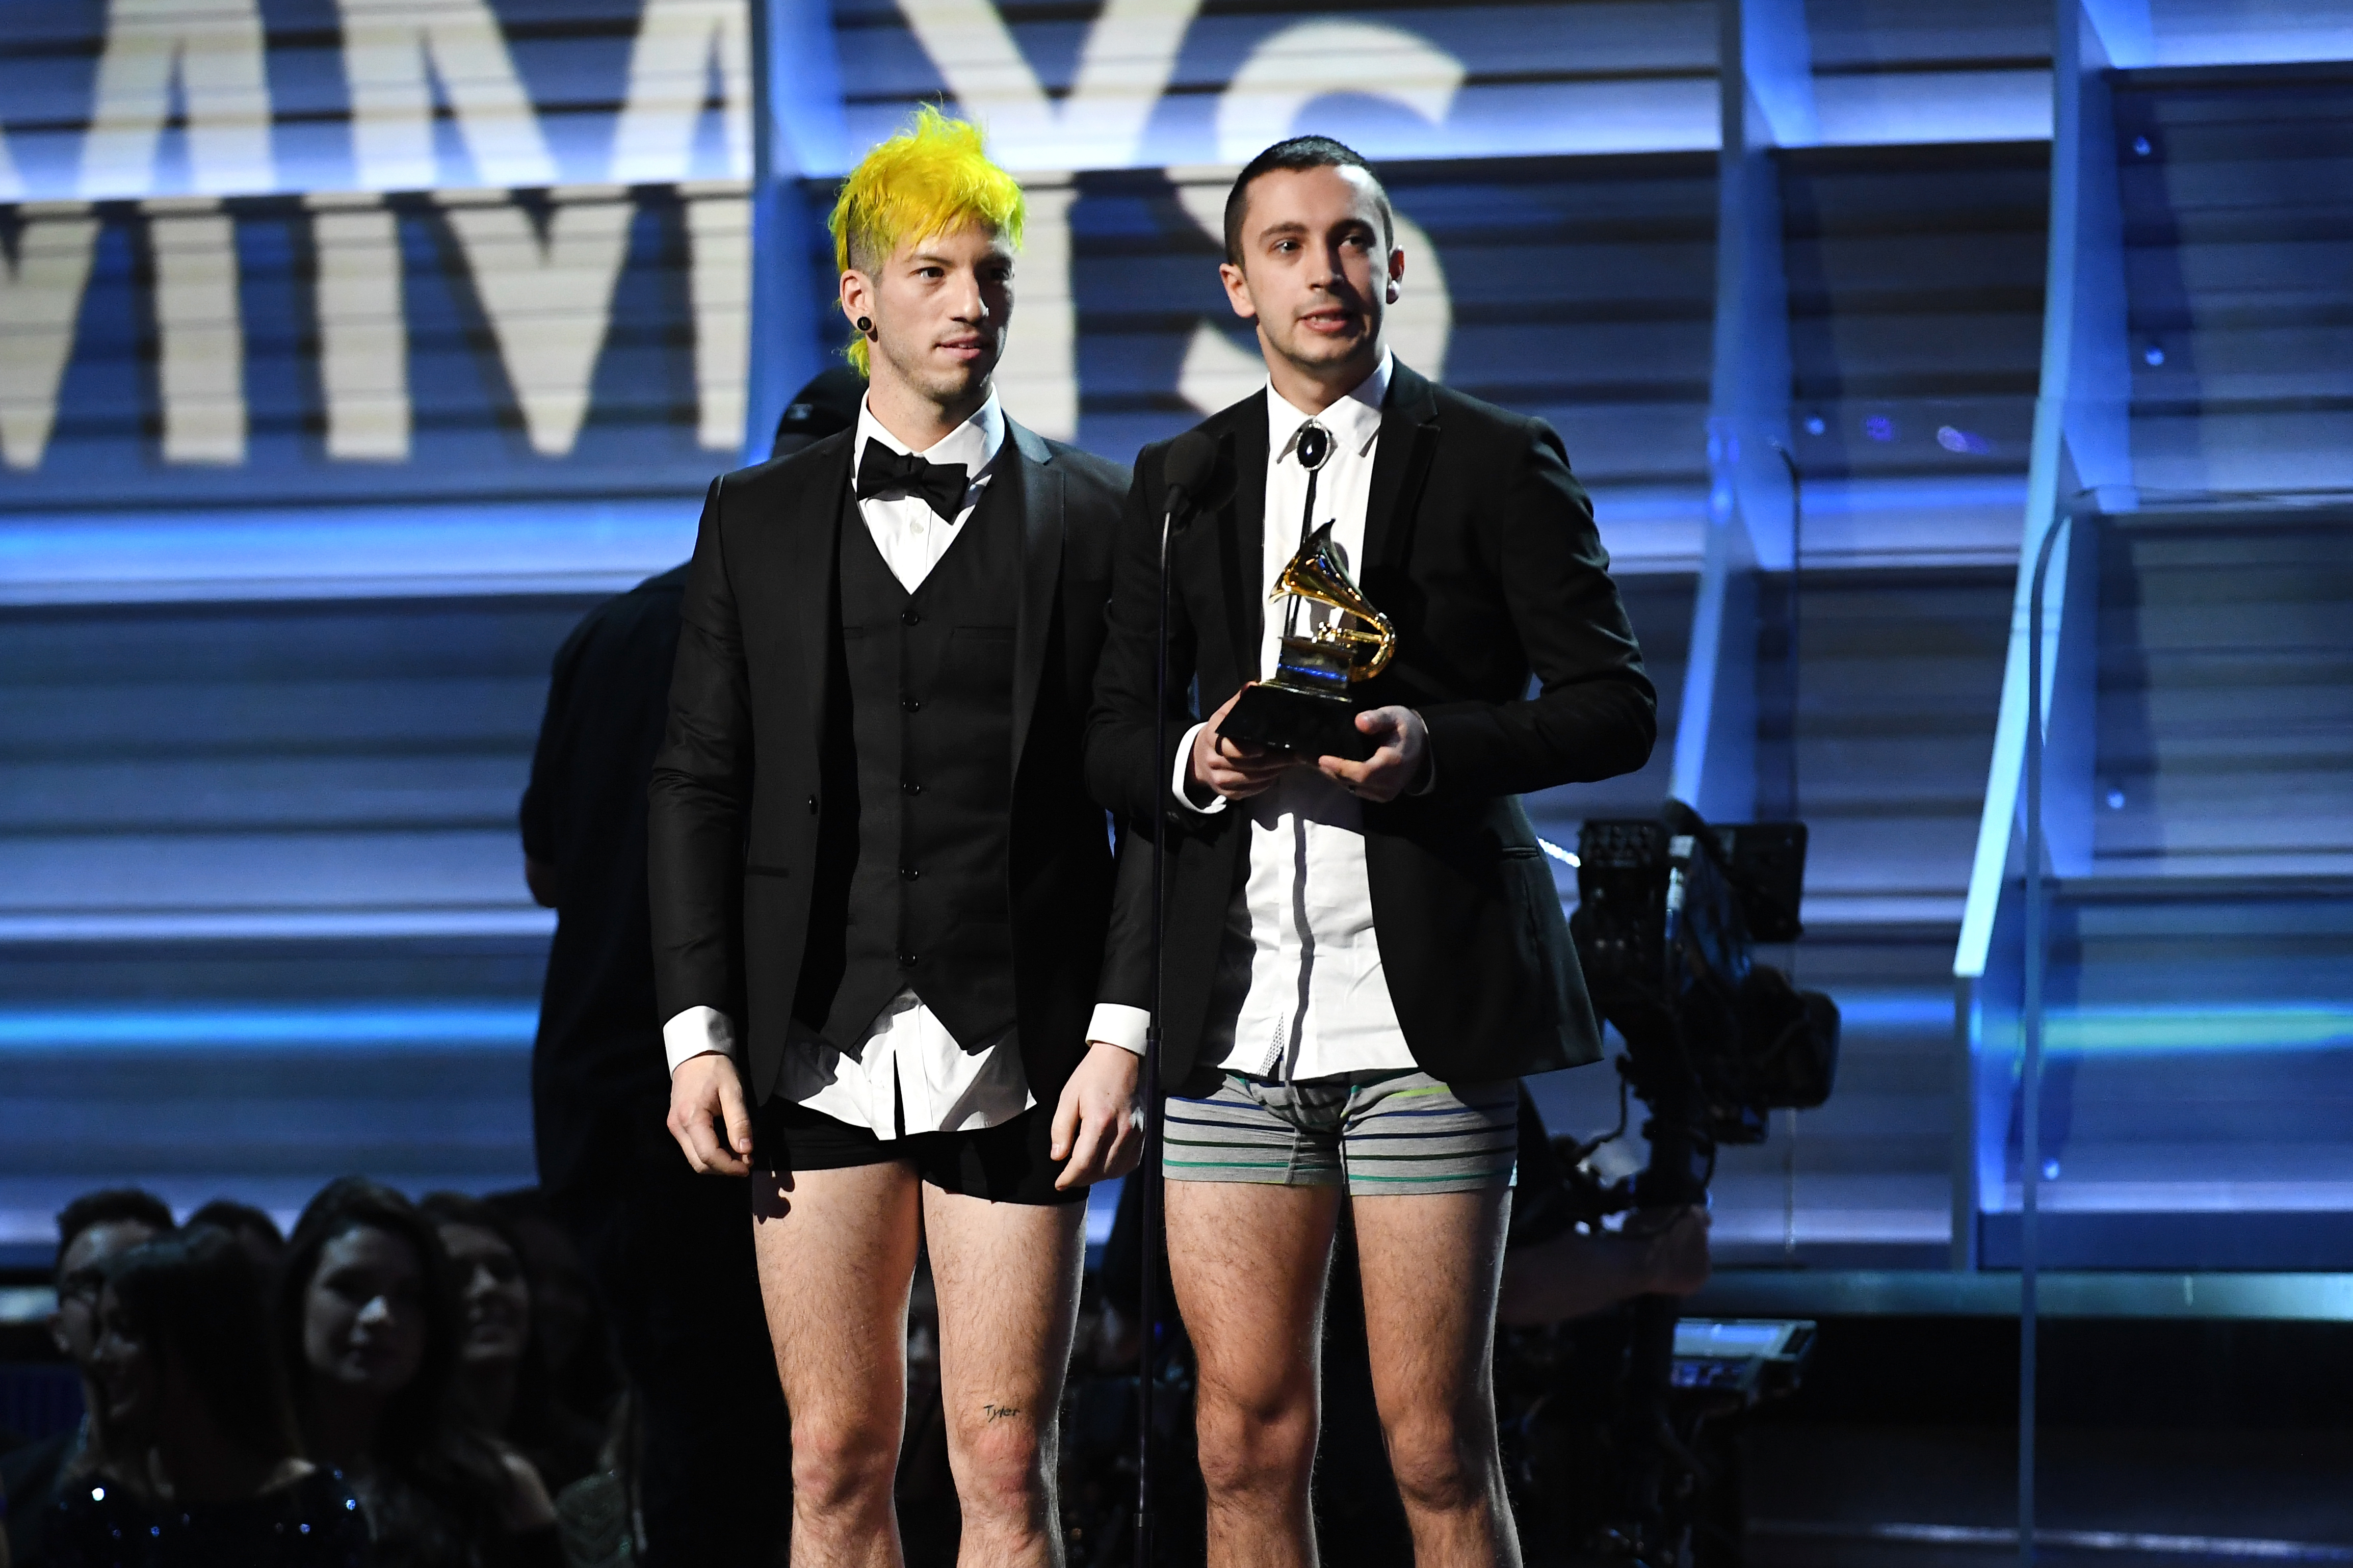 Recording artists Josh Dun and Tyler Joseph of Twenty One Pilots, accept the Grammy award for Best Pop Duo/Group Performance, on Feb. 12, 2017 in Los Angeles, California. (Kevork Djansezian—Getty Images)